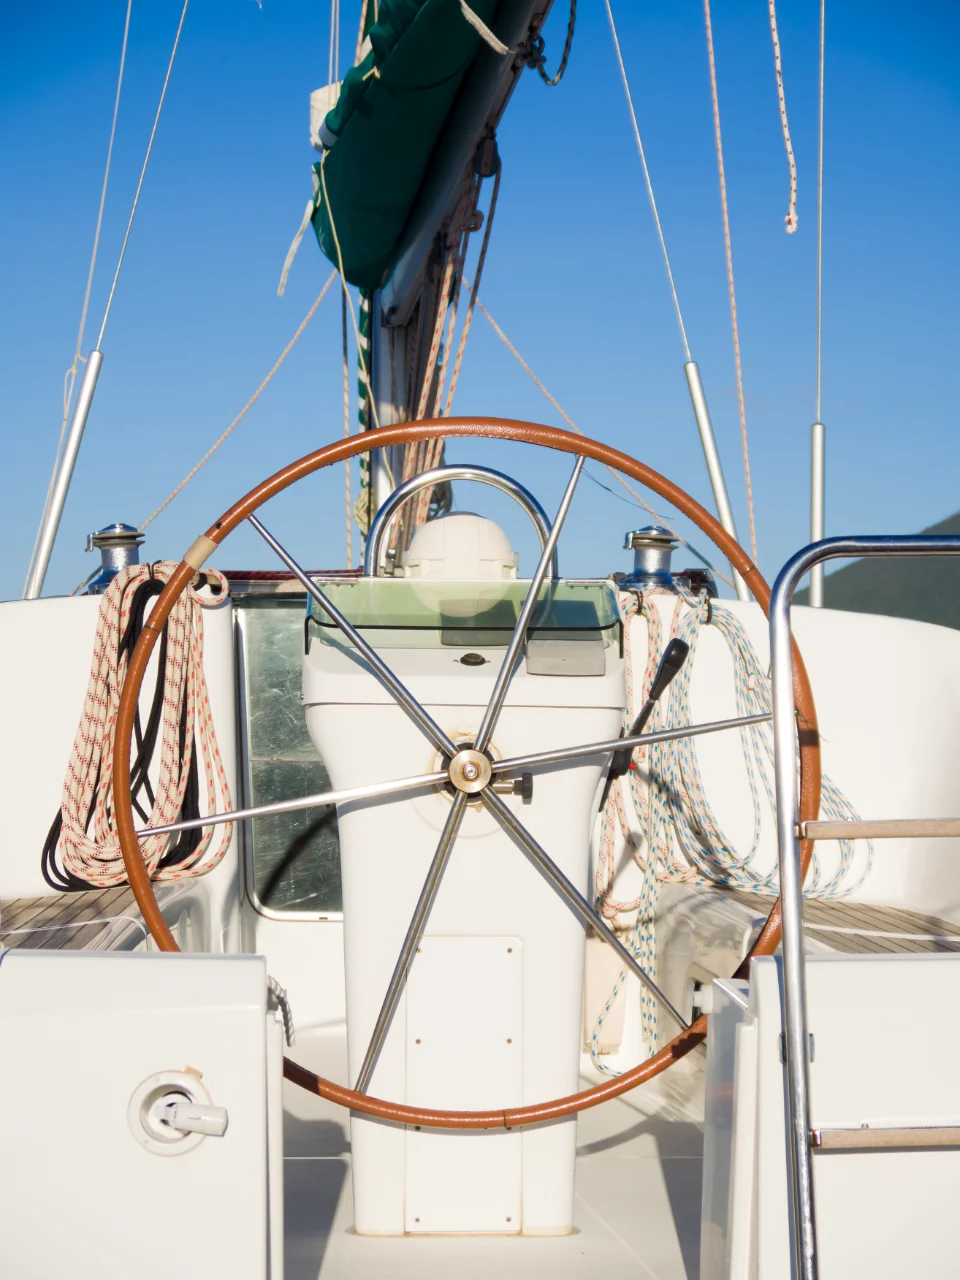 The photo shows the helm of a sailing yacht. It features a large wooden steering wheel at the center, surrounded by various ropes and seating areas on either side. The background displays a clear blue sky, contributing to the serene appearance.